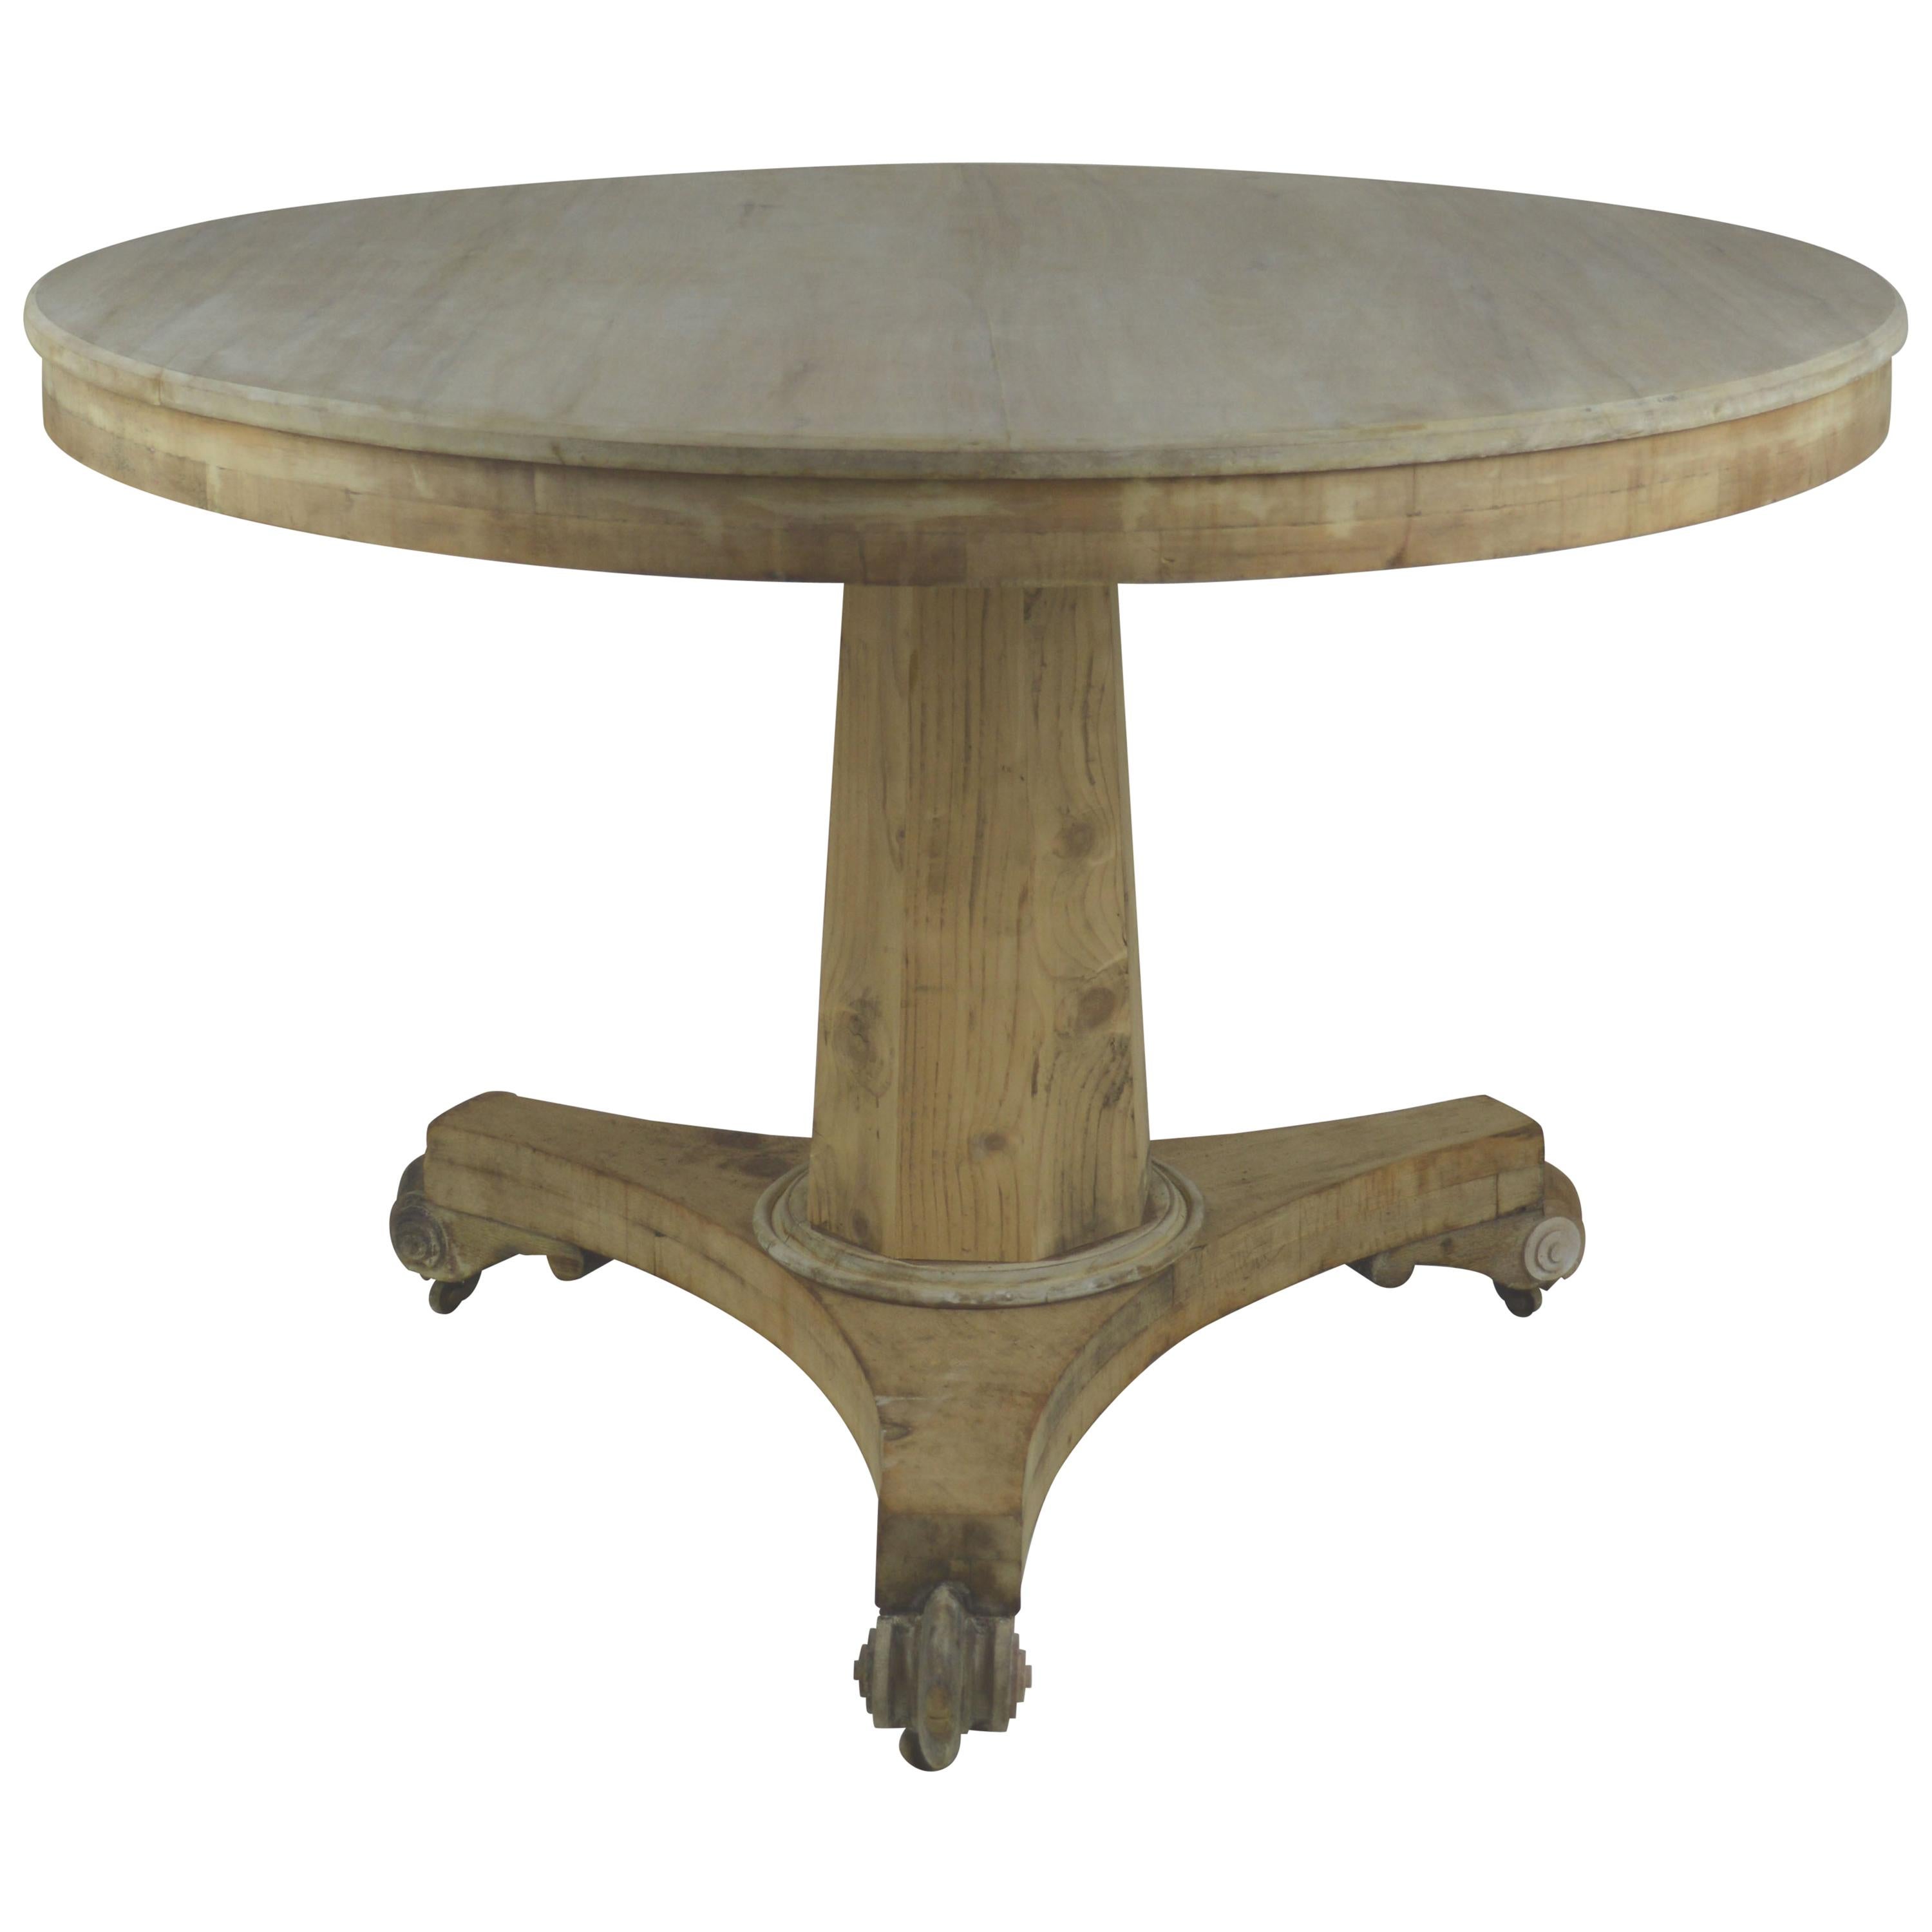 Large Antique Round Bleached Mahogany and Pine Table